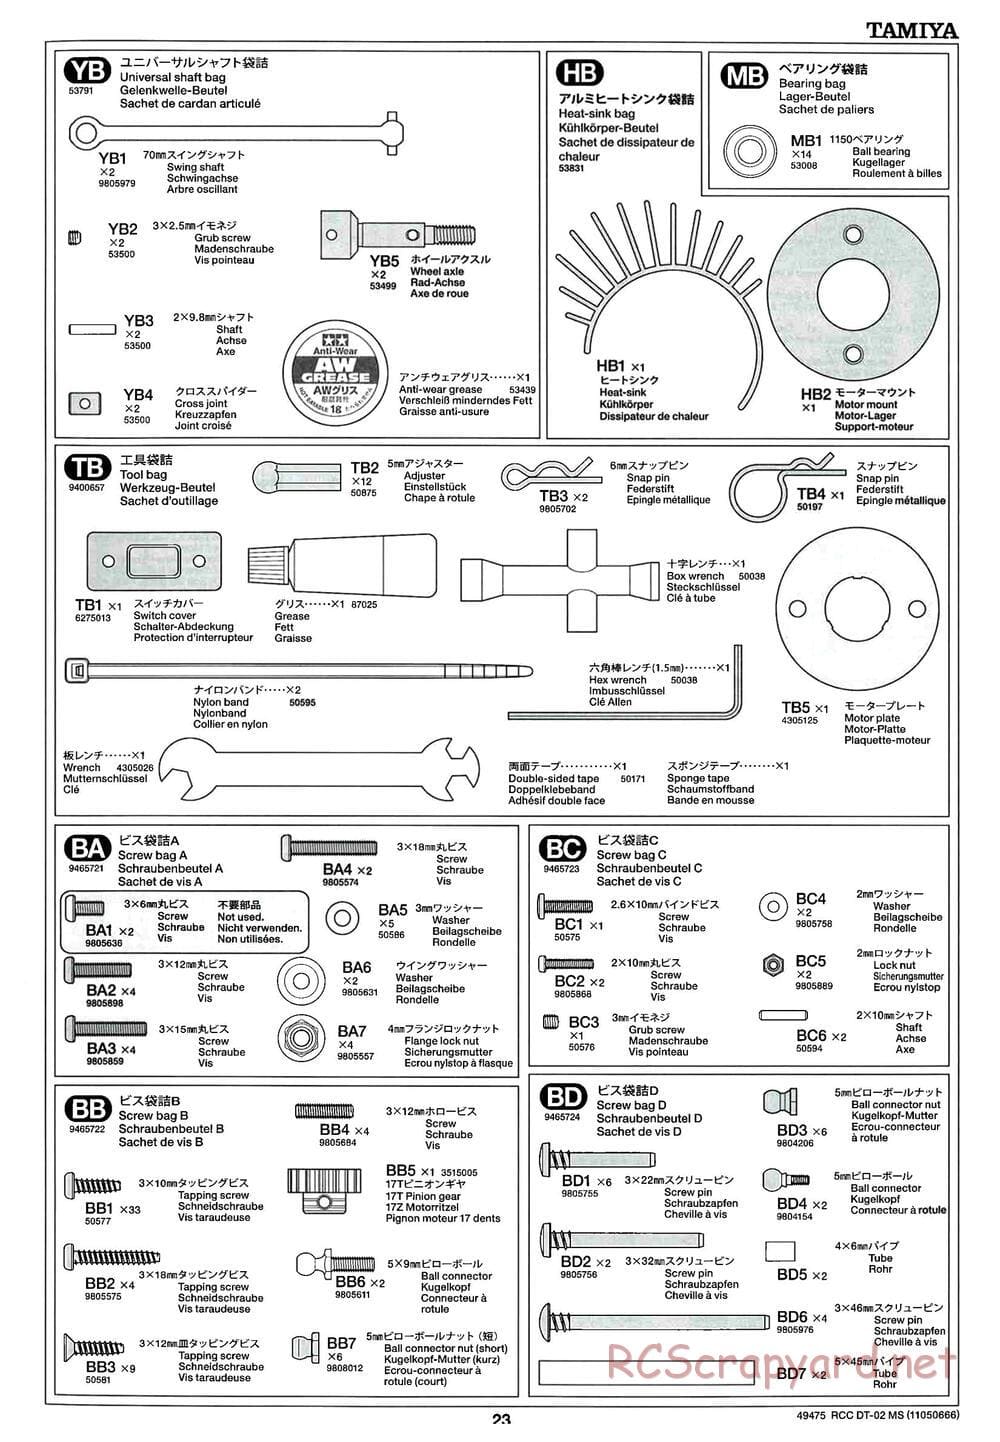 Tamiya - DT-02 MS Chassis - Manual - Page 24